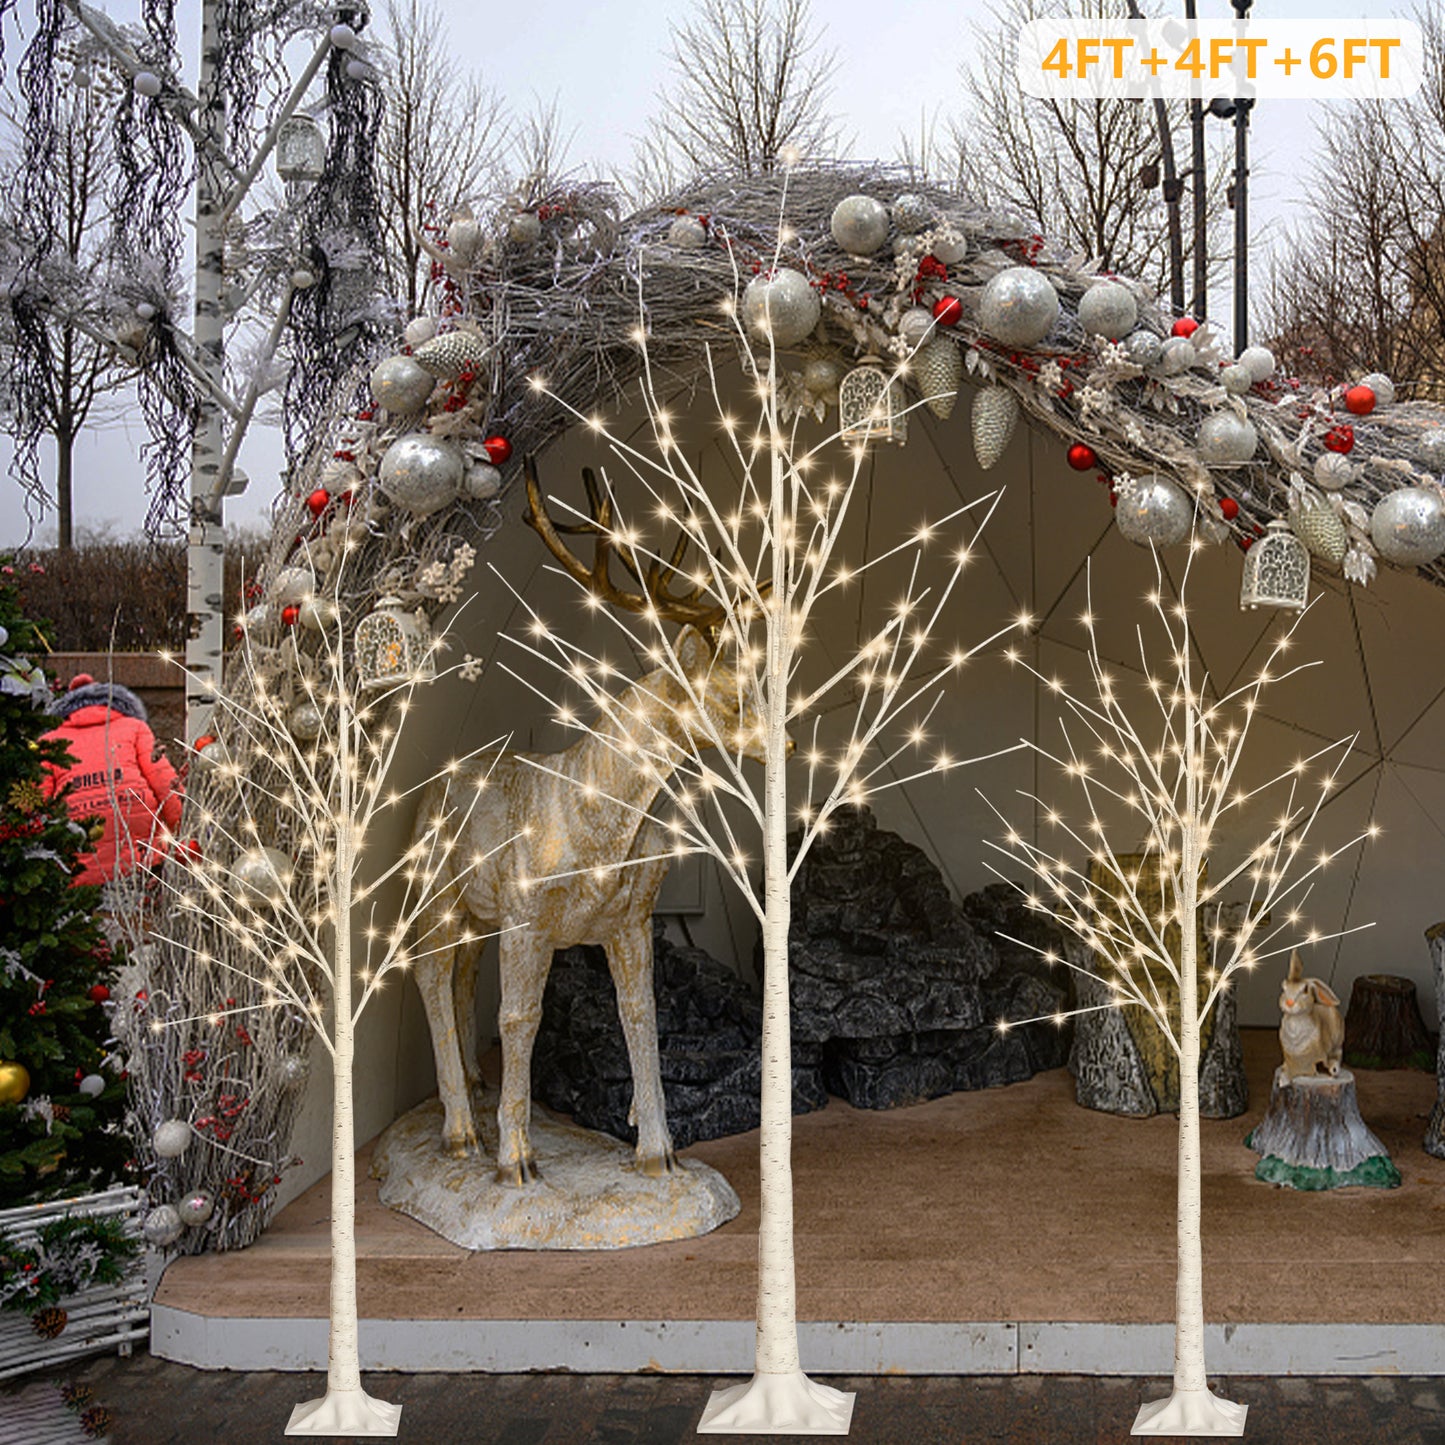 4ft/4ft/6ft White Birch Trees Set of 3, SYNGAR Christmas Trees with LED Lights, Lighted Birch Trees for Home Indoor Outdoor Festival Party Decoration, Christmas Decoration Trees, Warm White, D4010